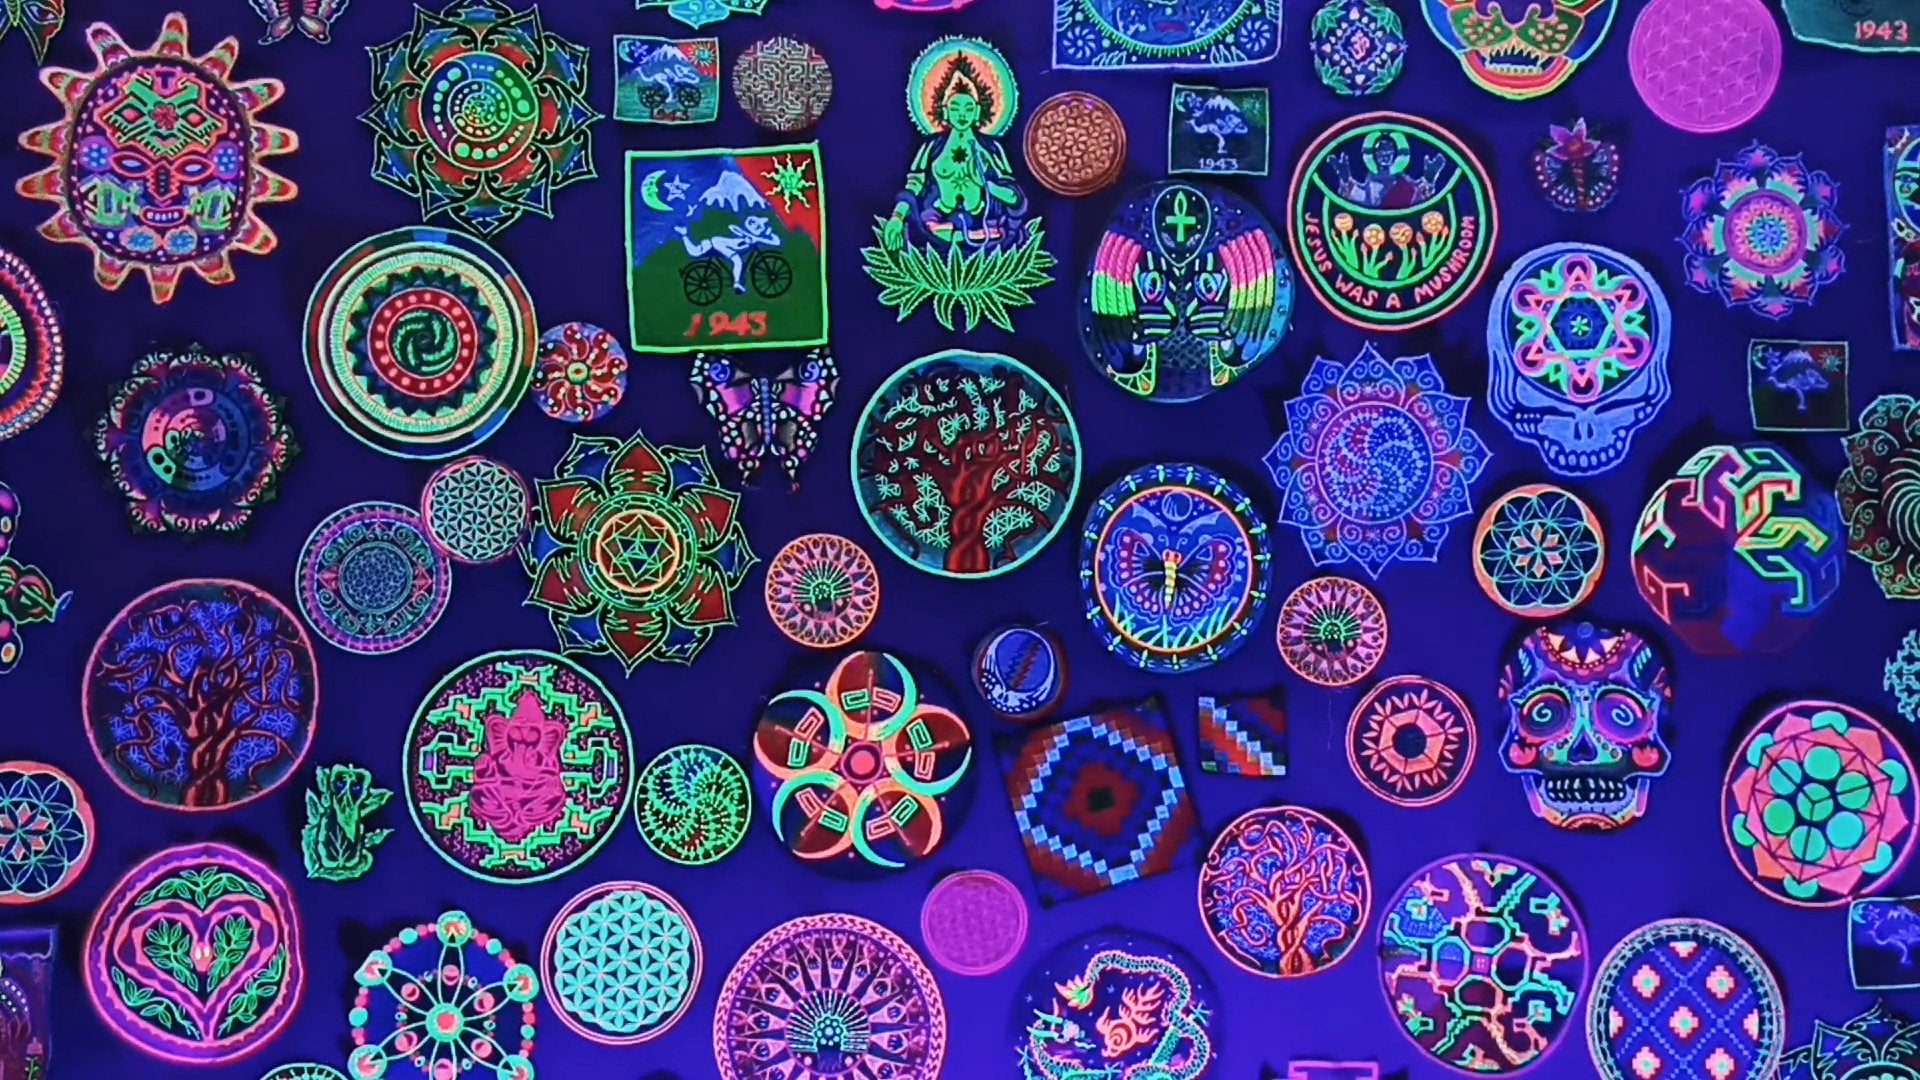 Flower of Life Tree of Life sacred geometry embroidery art patch blacklight glowing uv active for sew on machine washable ironable